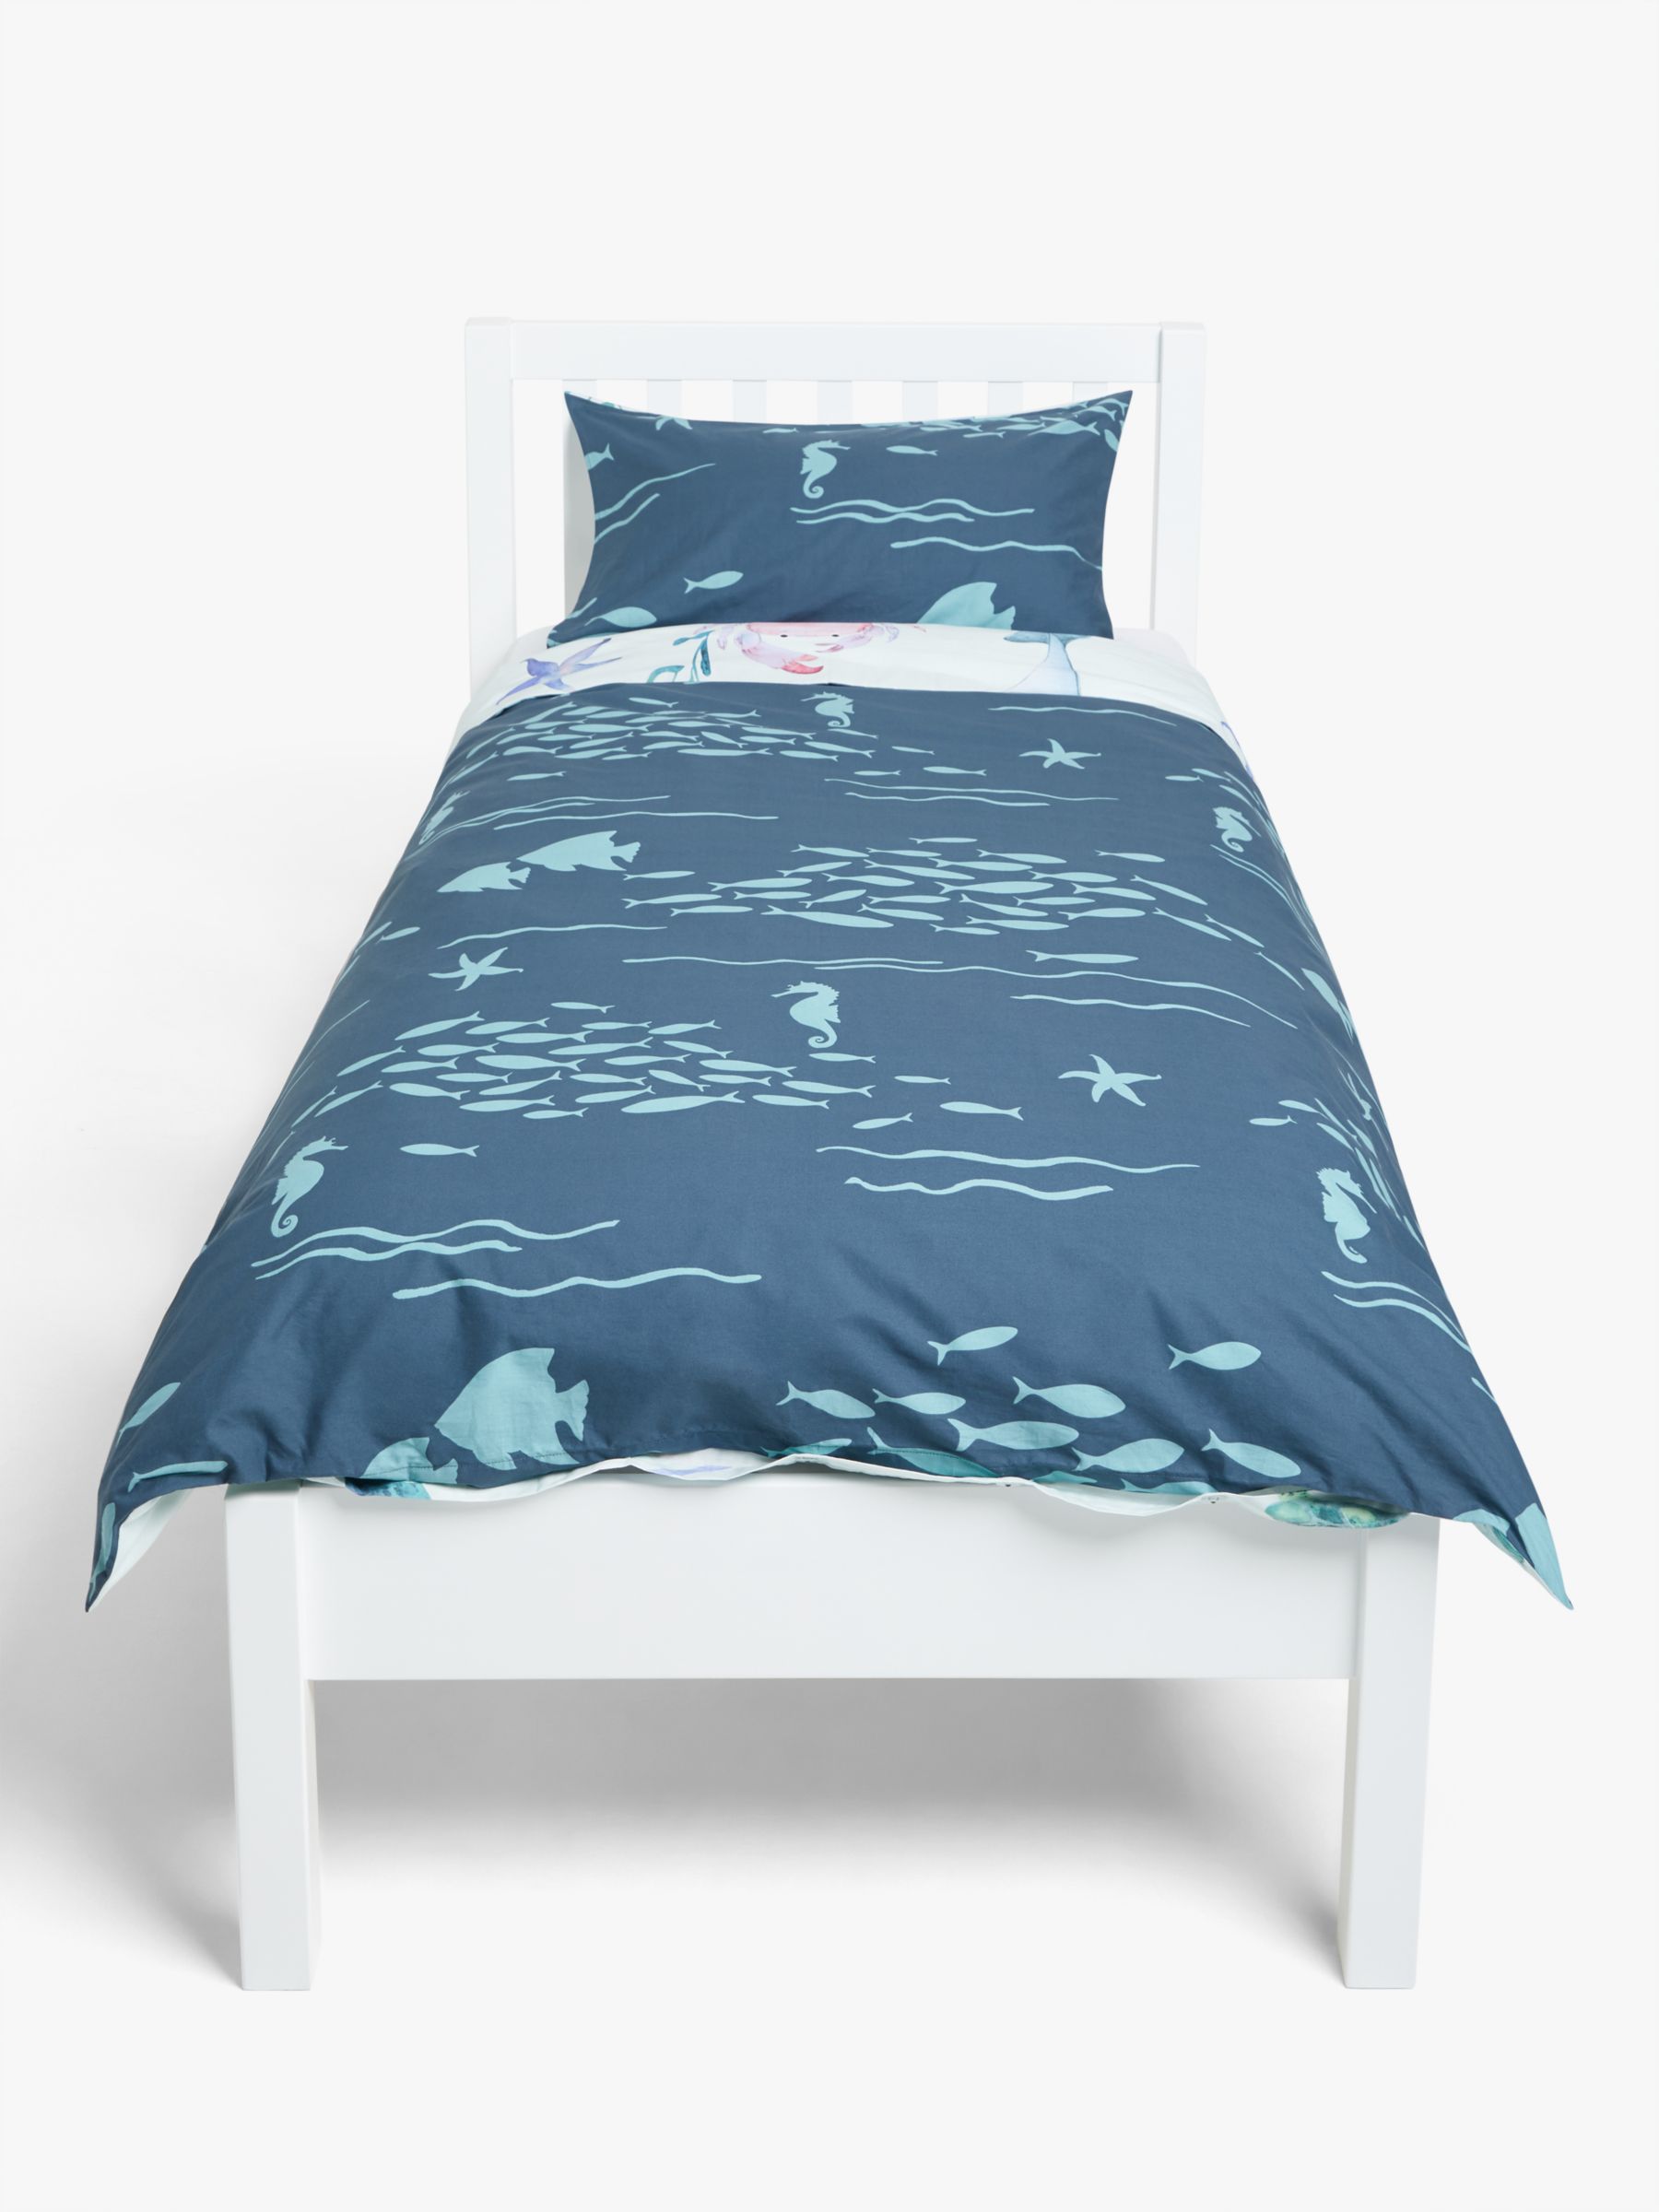 Little Home At John Lewis Under The Sea Reversible Duvet Cover And